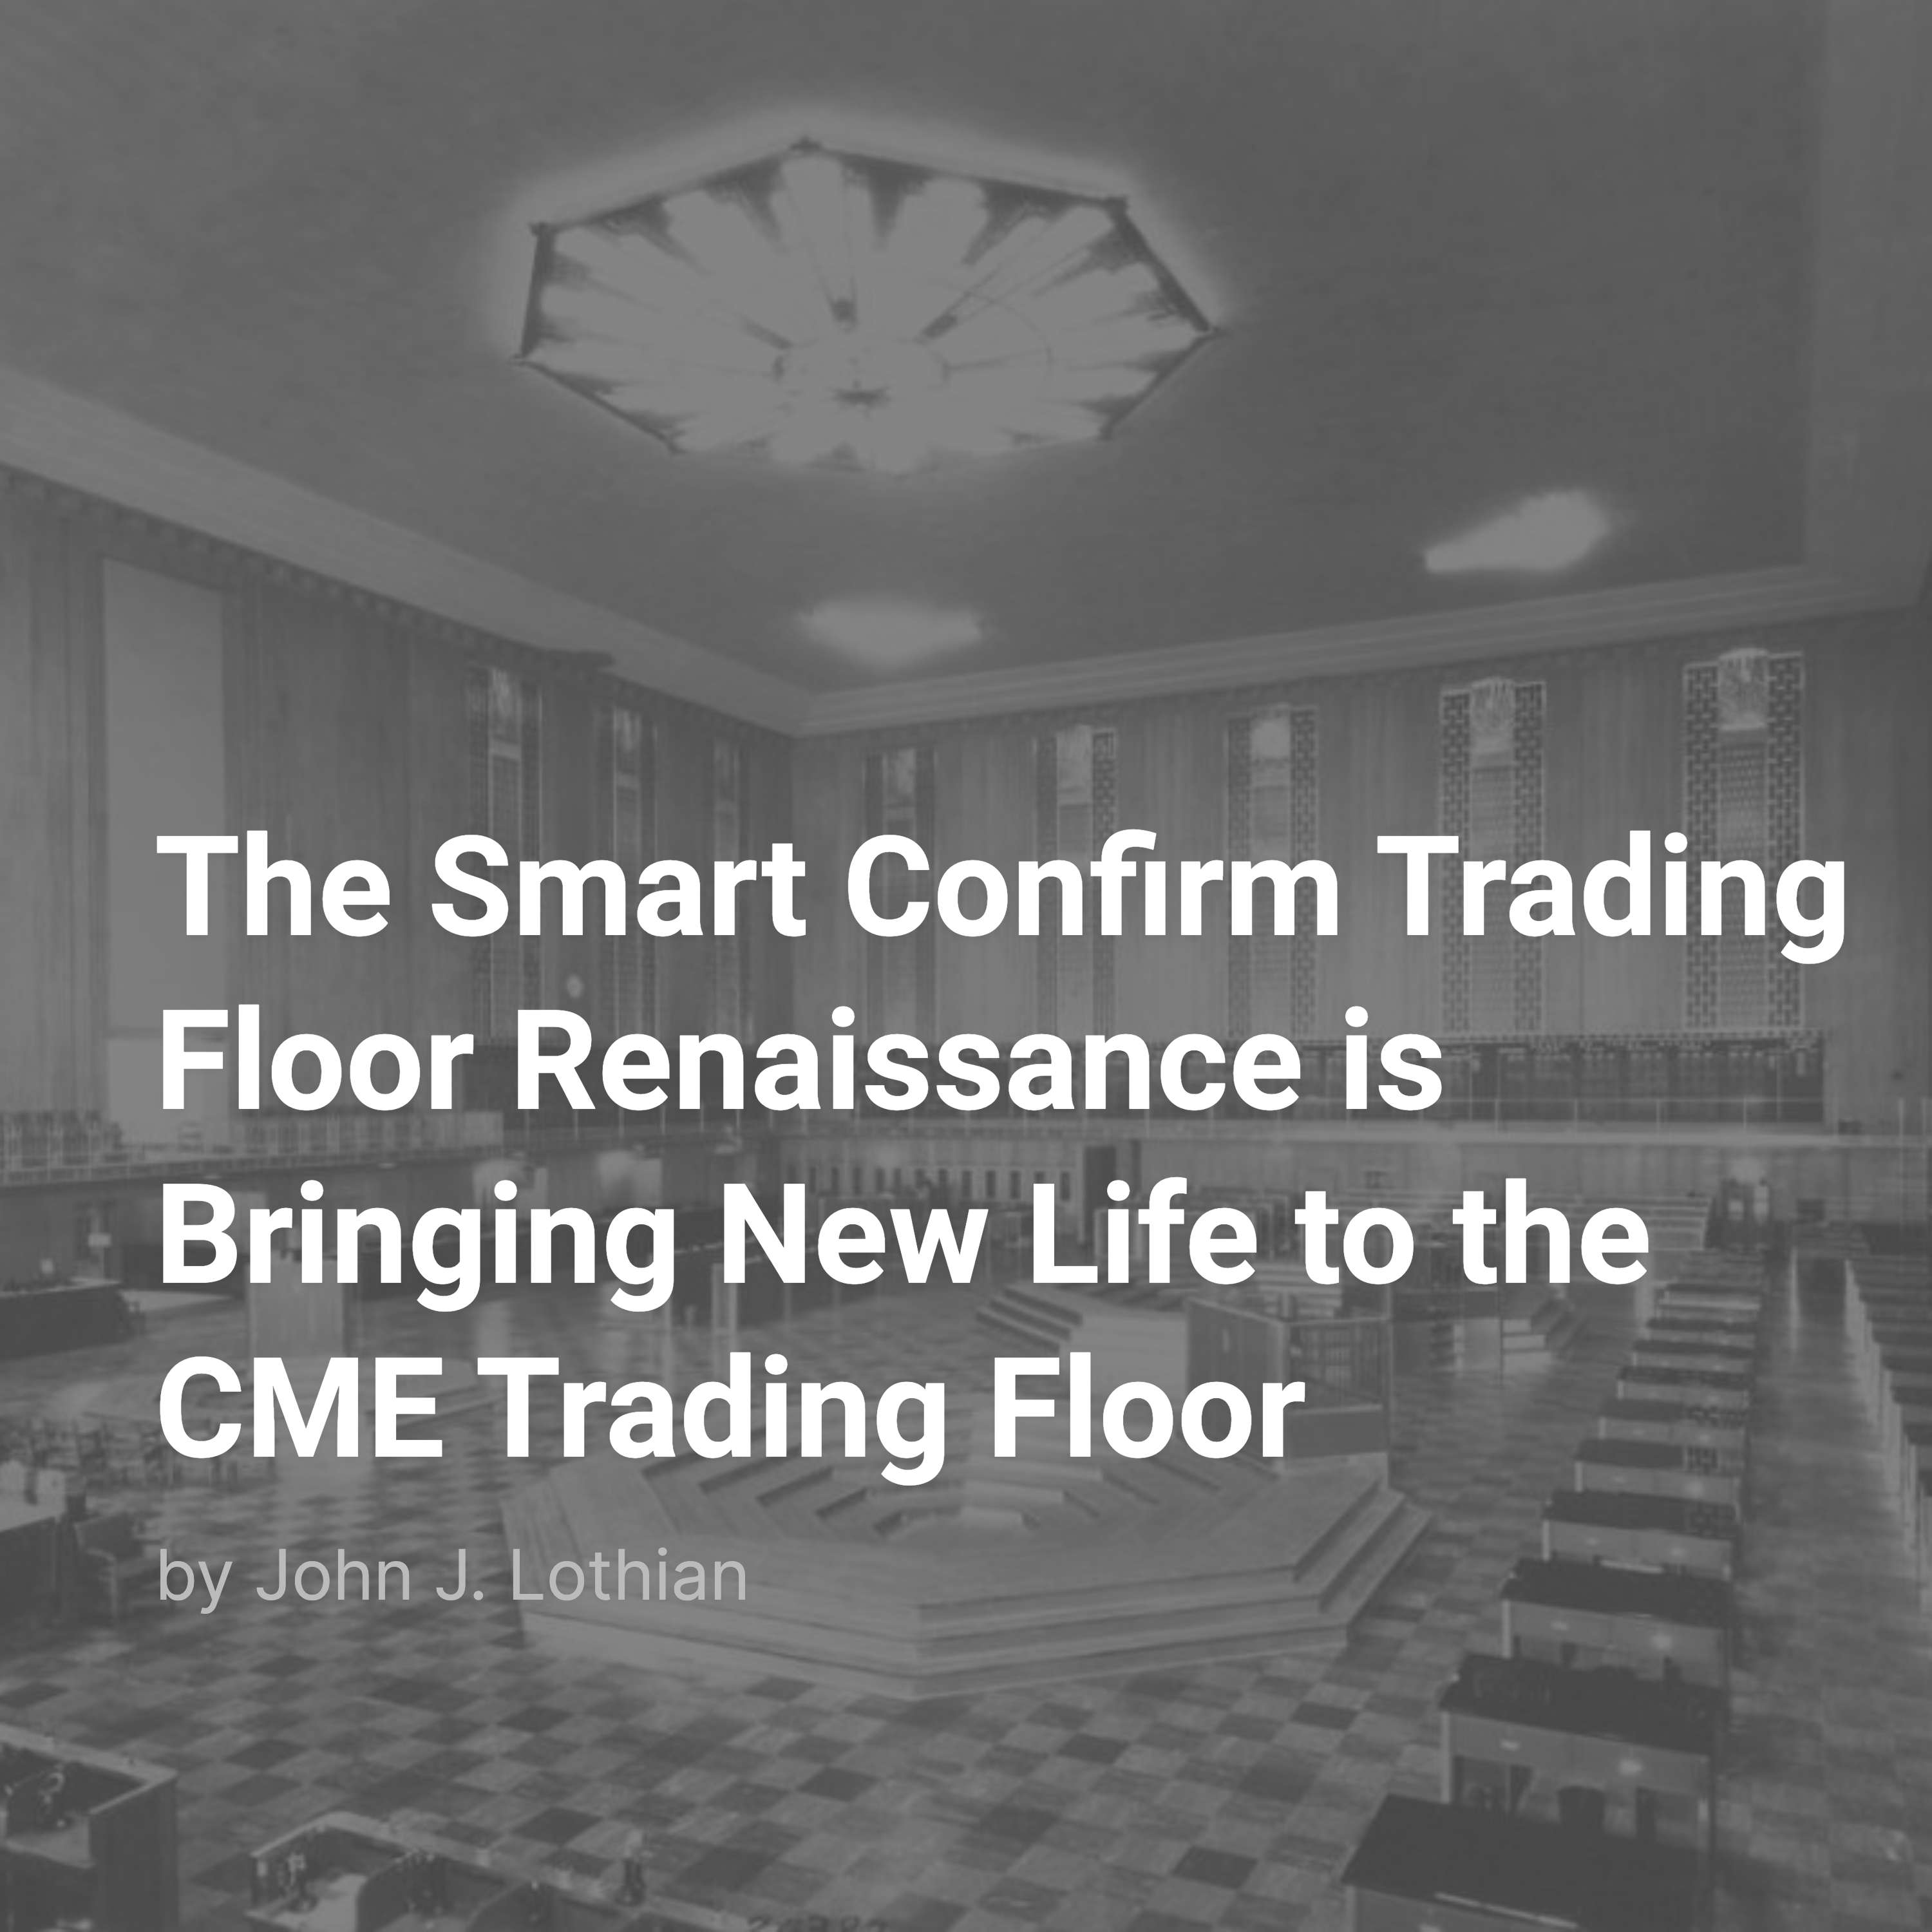 The Smart Confirm Trading Floor Renaissance is Bringing New Life to the CME Trading Floor